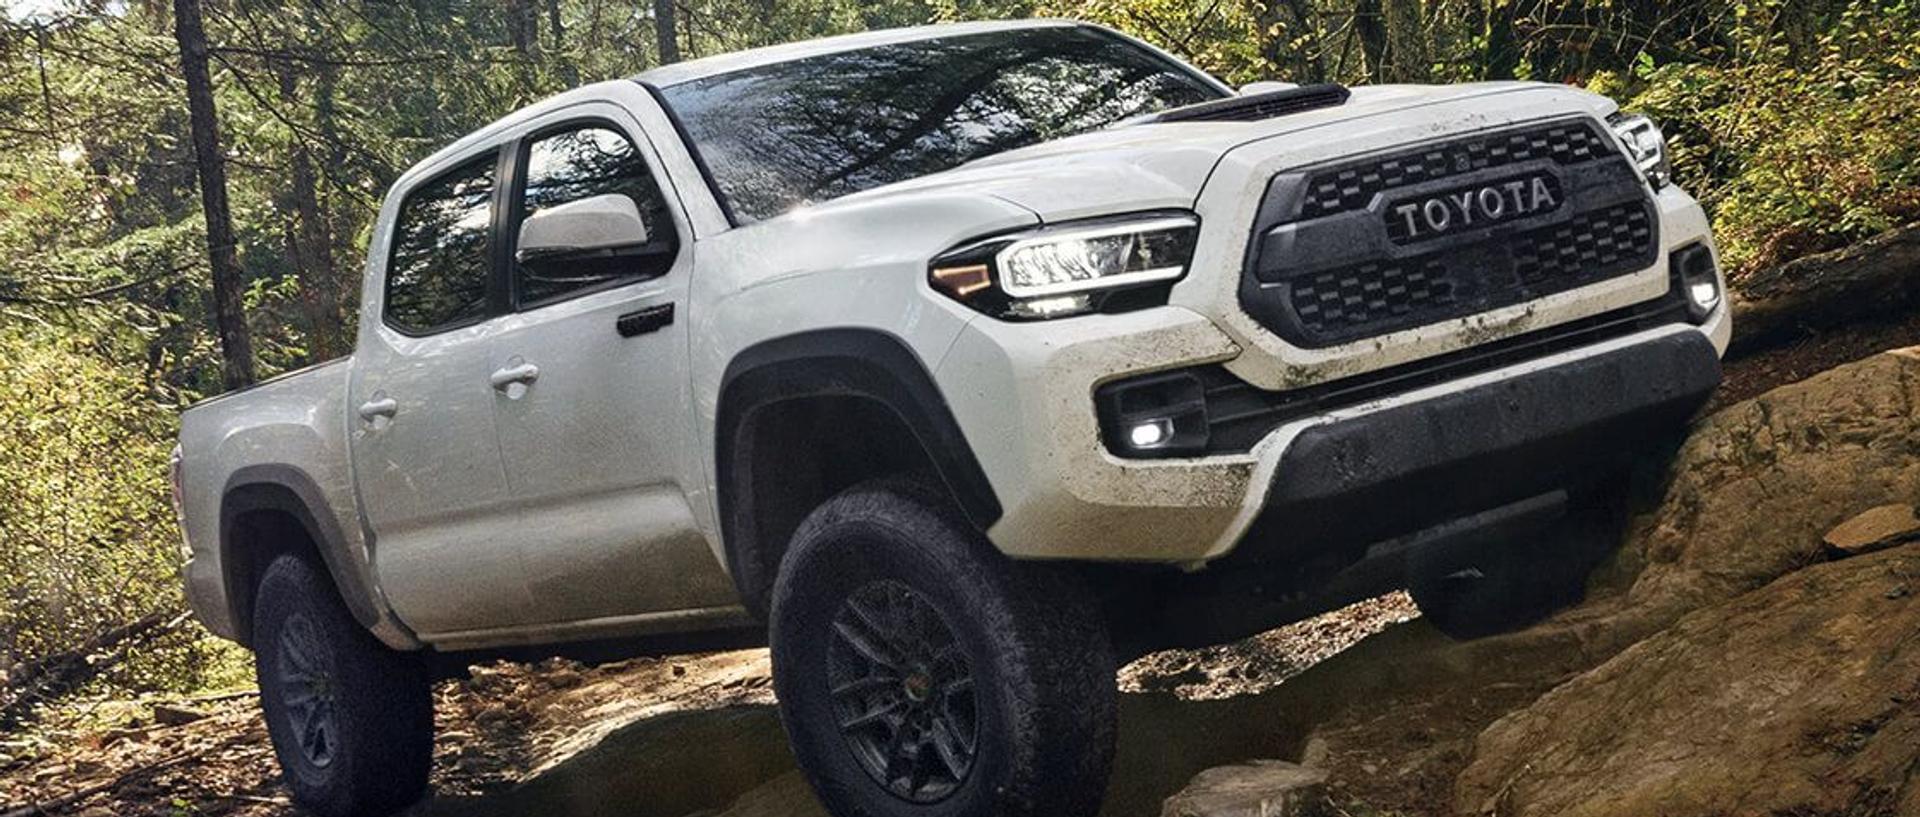 Toyota Truck touch - white Toyota Tundra driving up a mountain